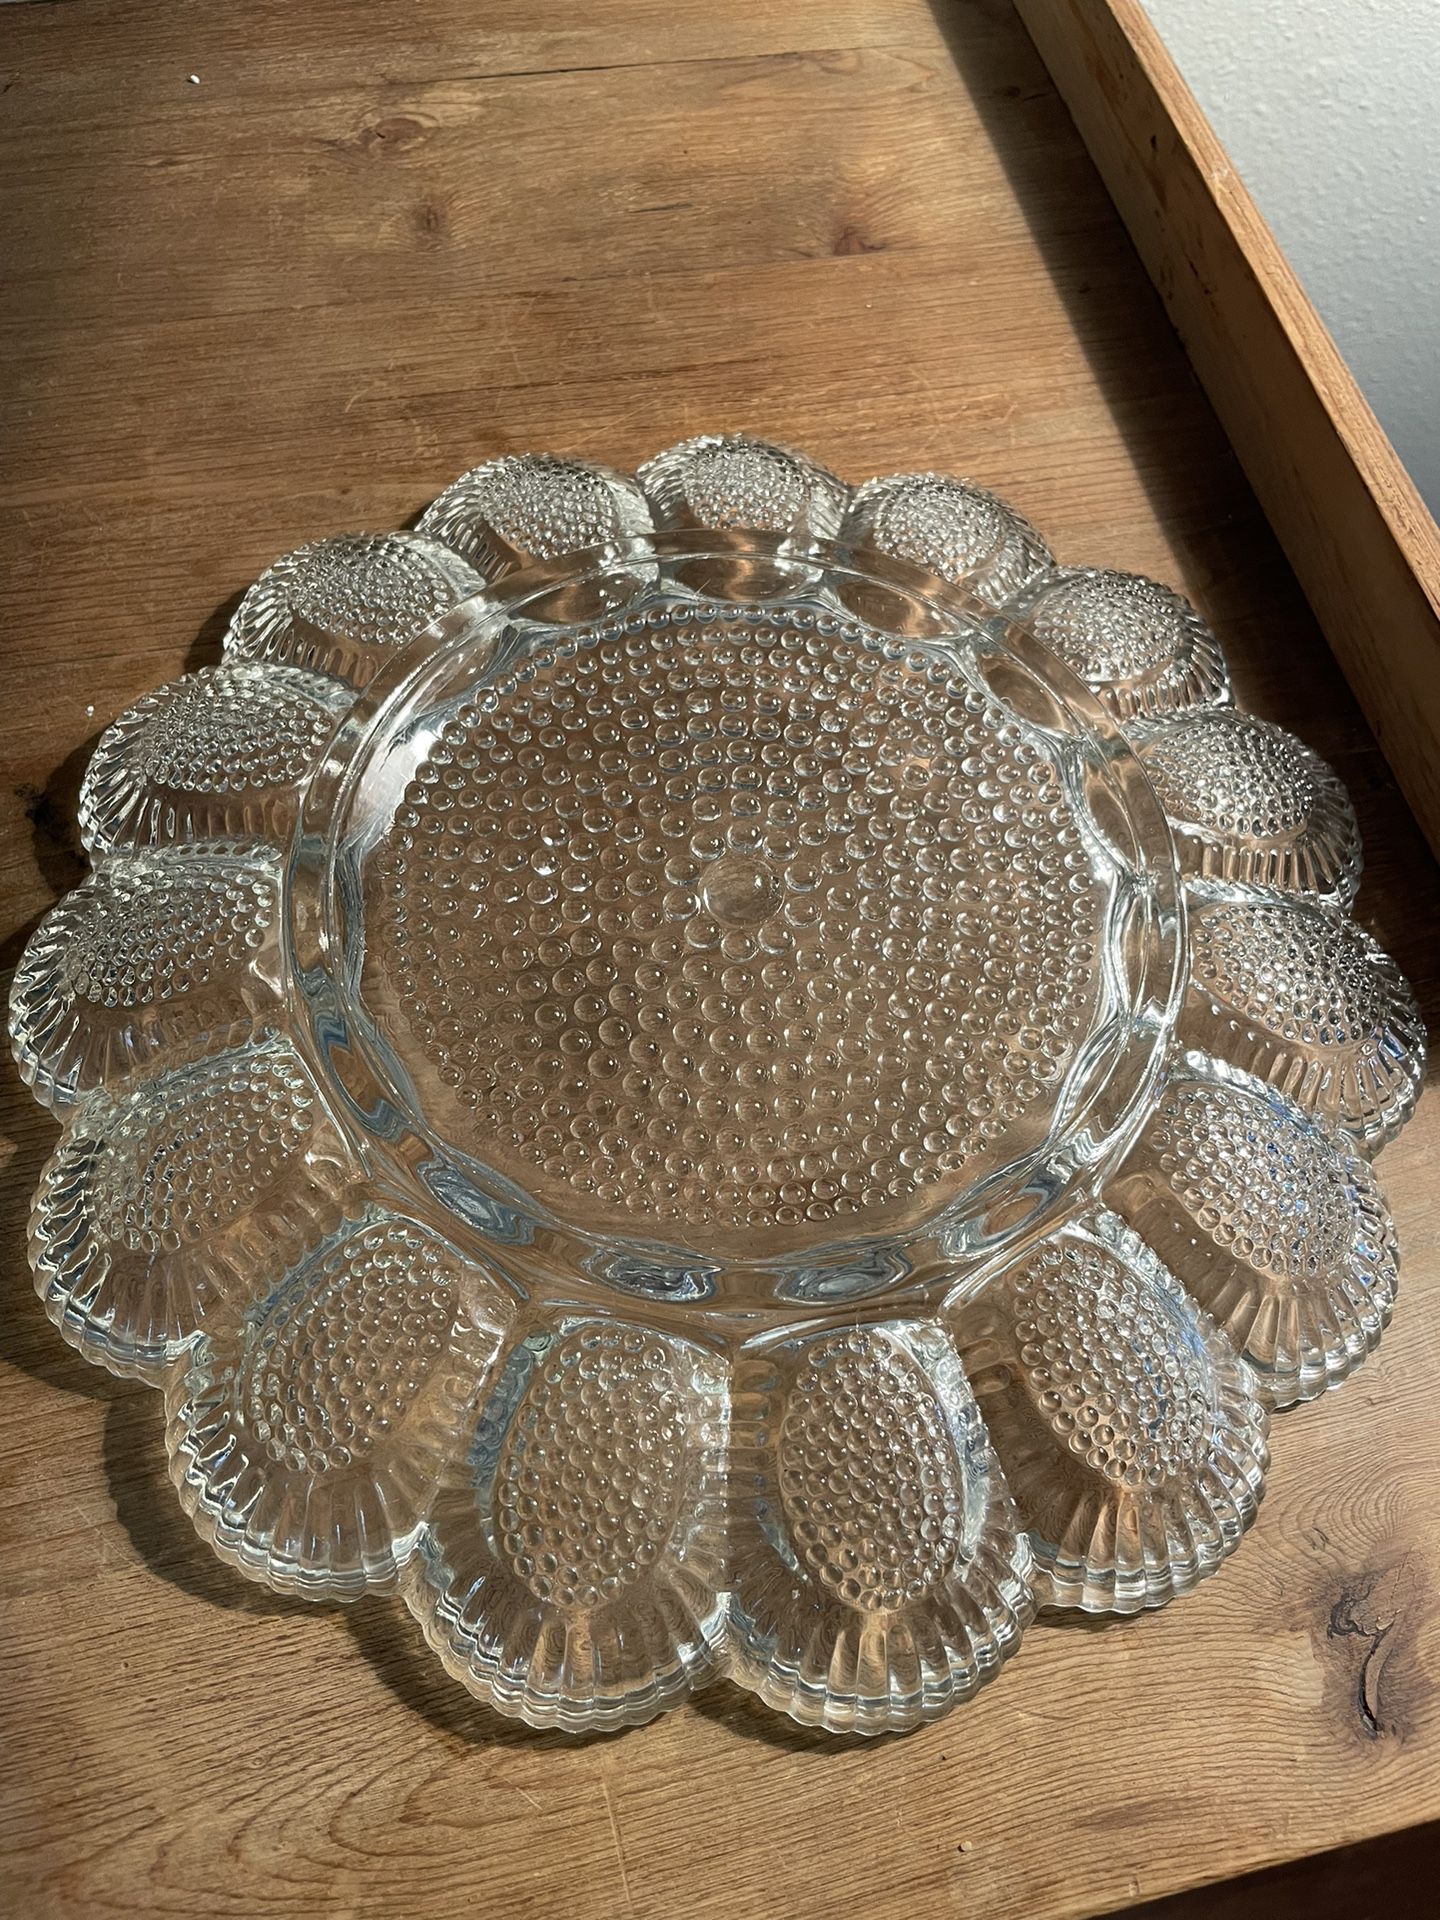 ANTIQUE INDIANA GLASS HOBNAIL